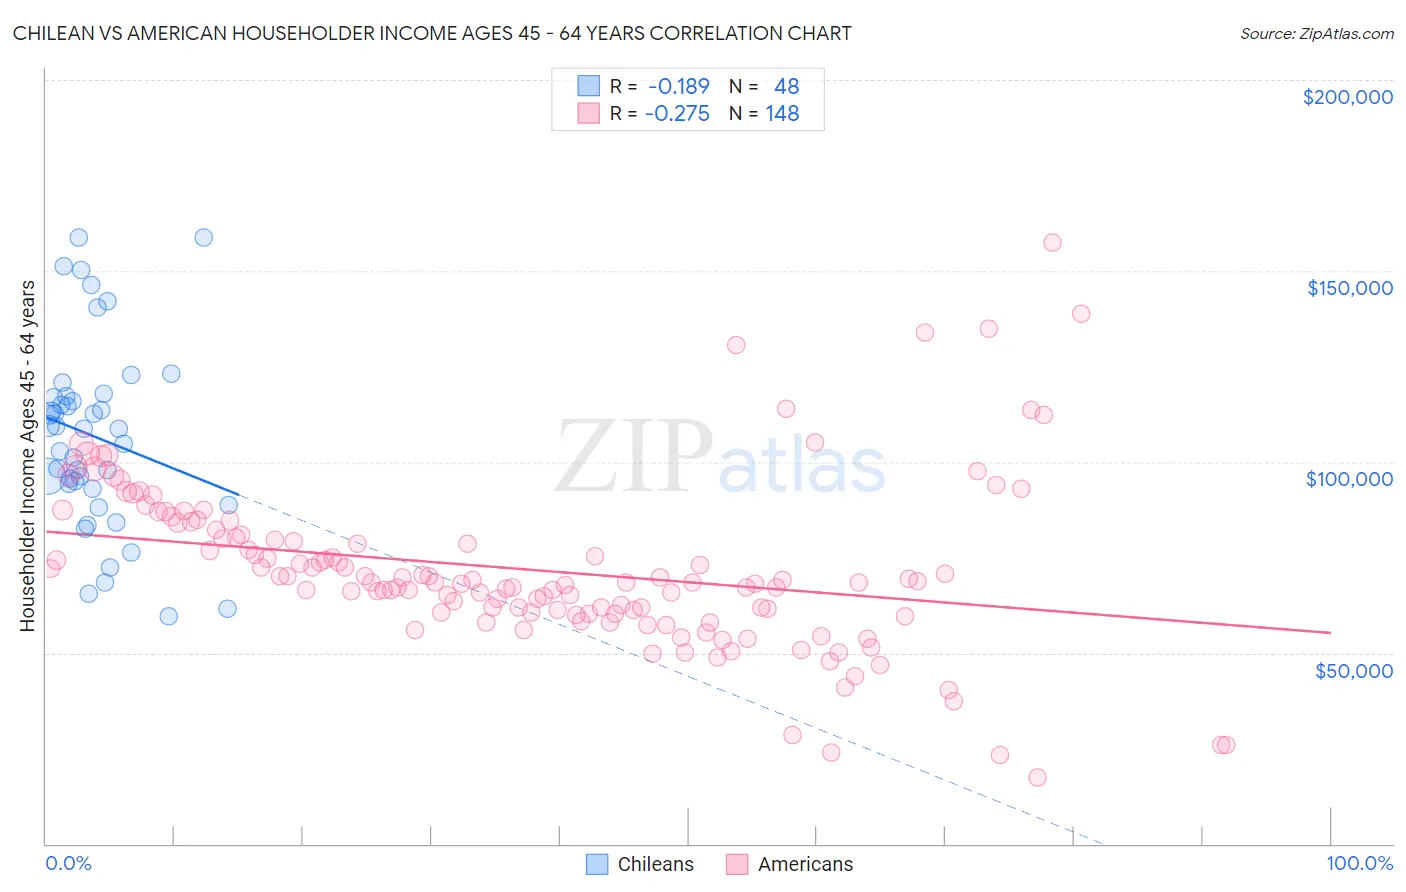 Chilean vs American Householder Income Ages 45 - 64 years